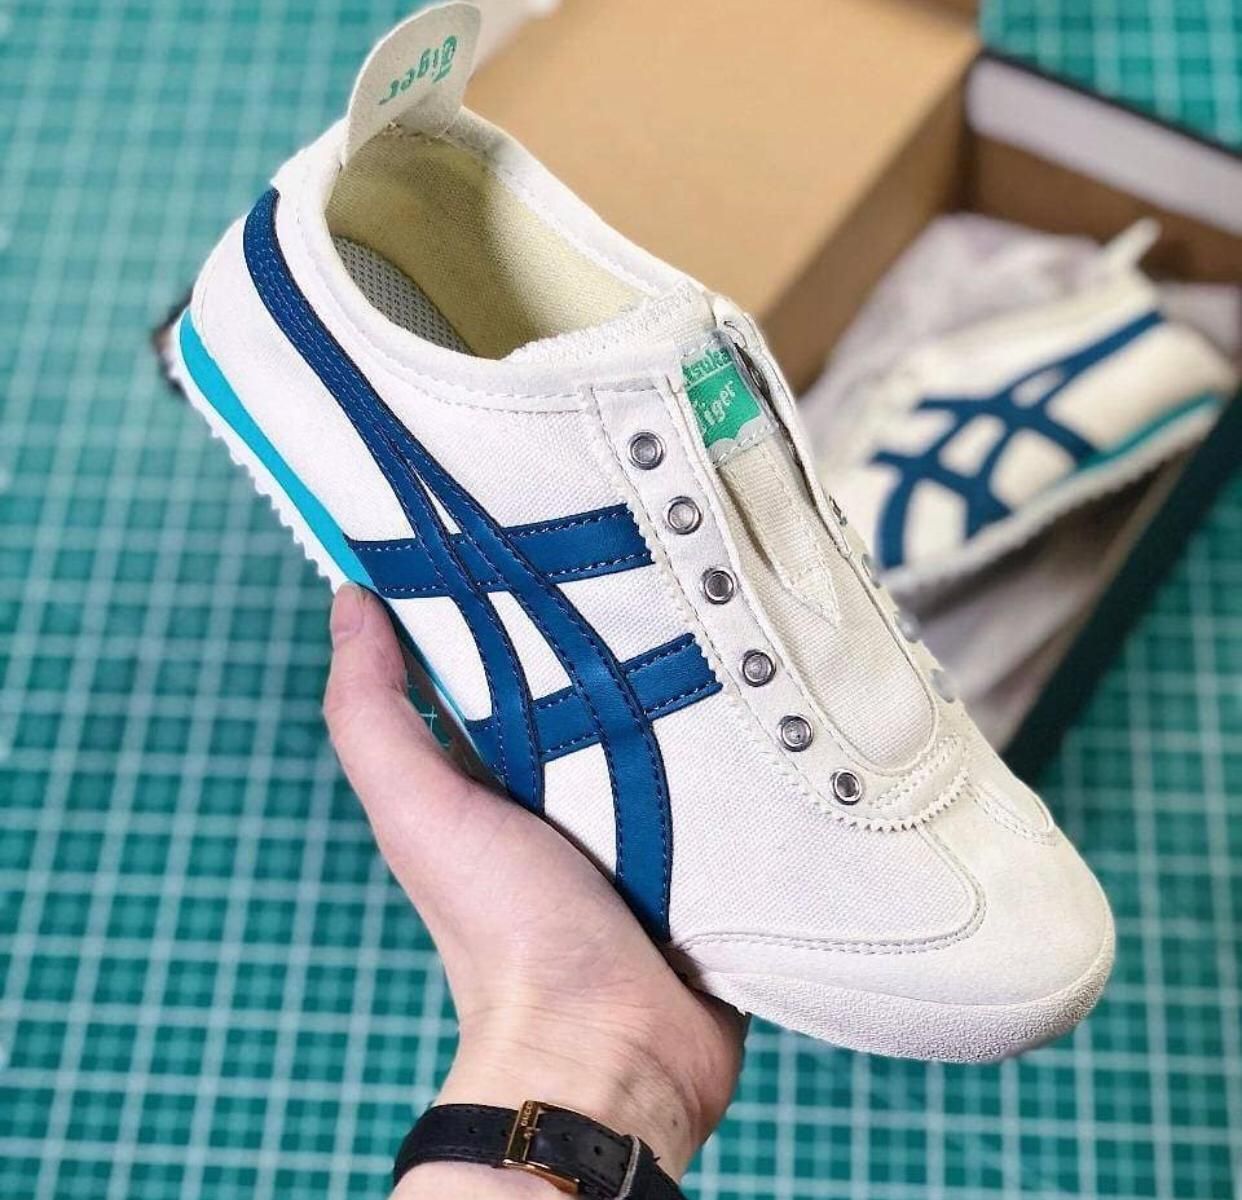 First Copy Onitsuka Tiger 66 Slip On “White/Green/Blue”